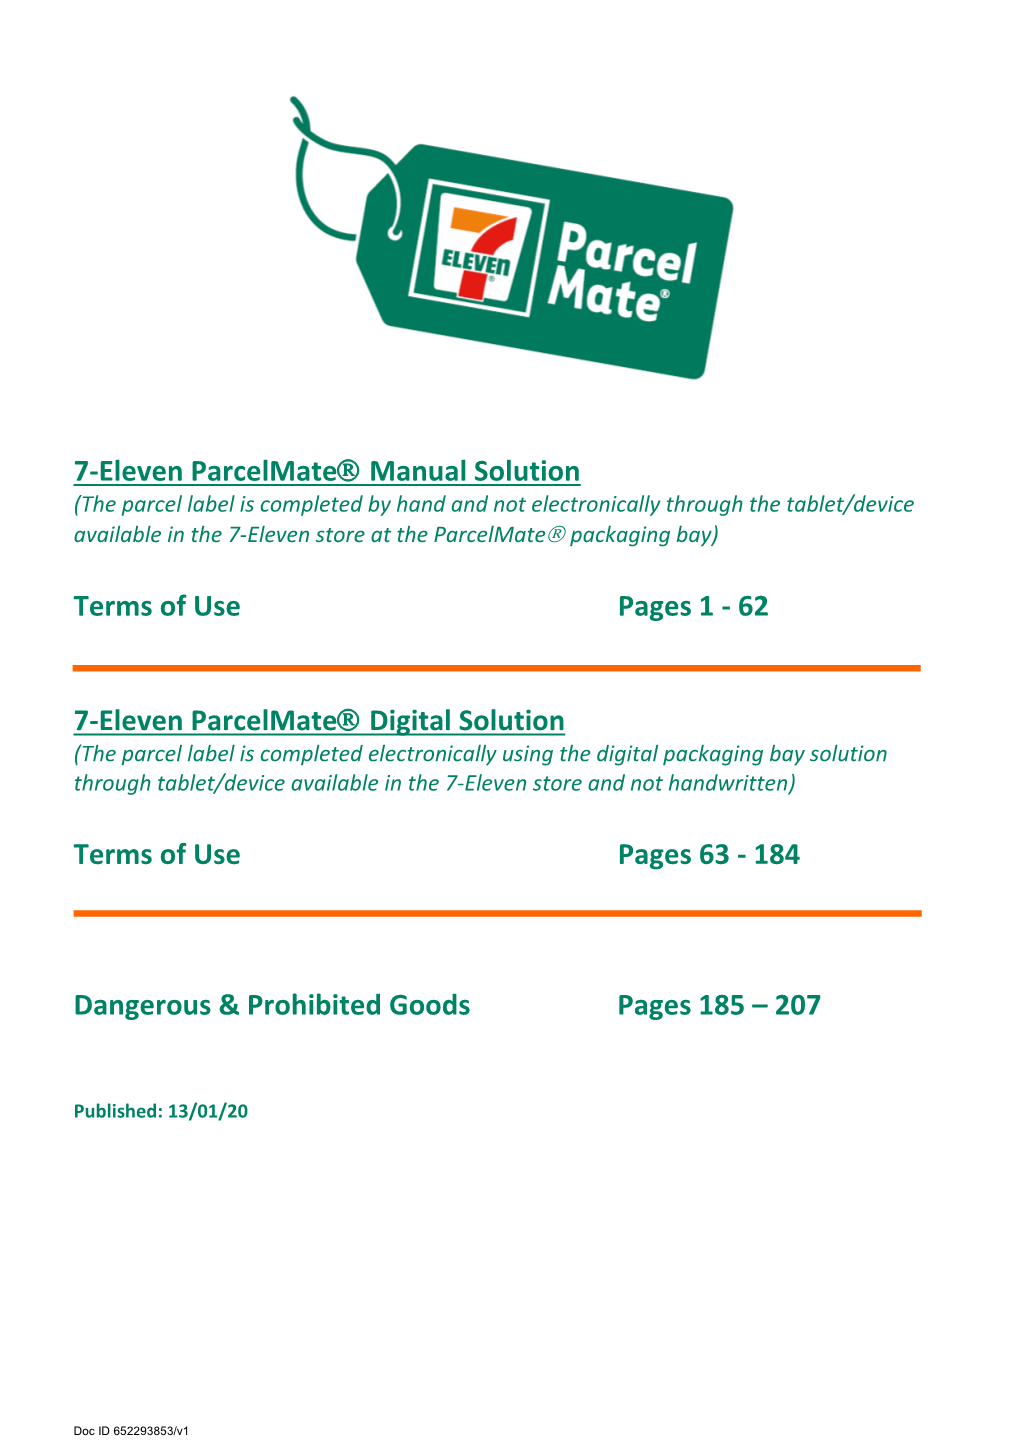 7-Eleven Parcelmate® Manual Solution Terms of Use Pages 1